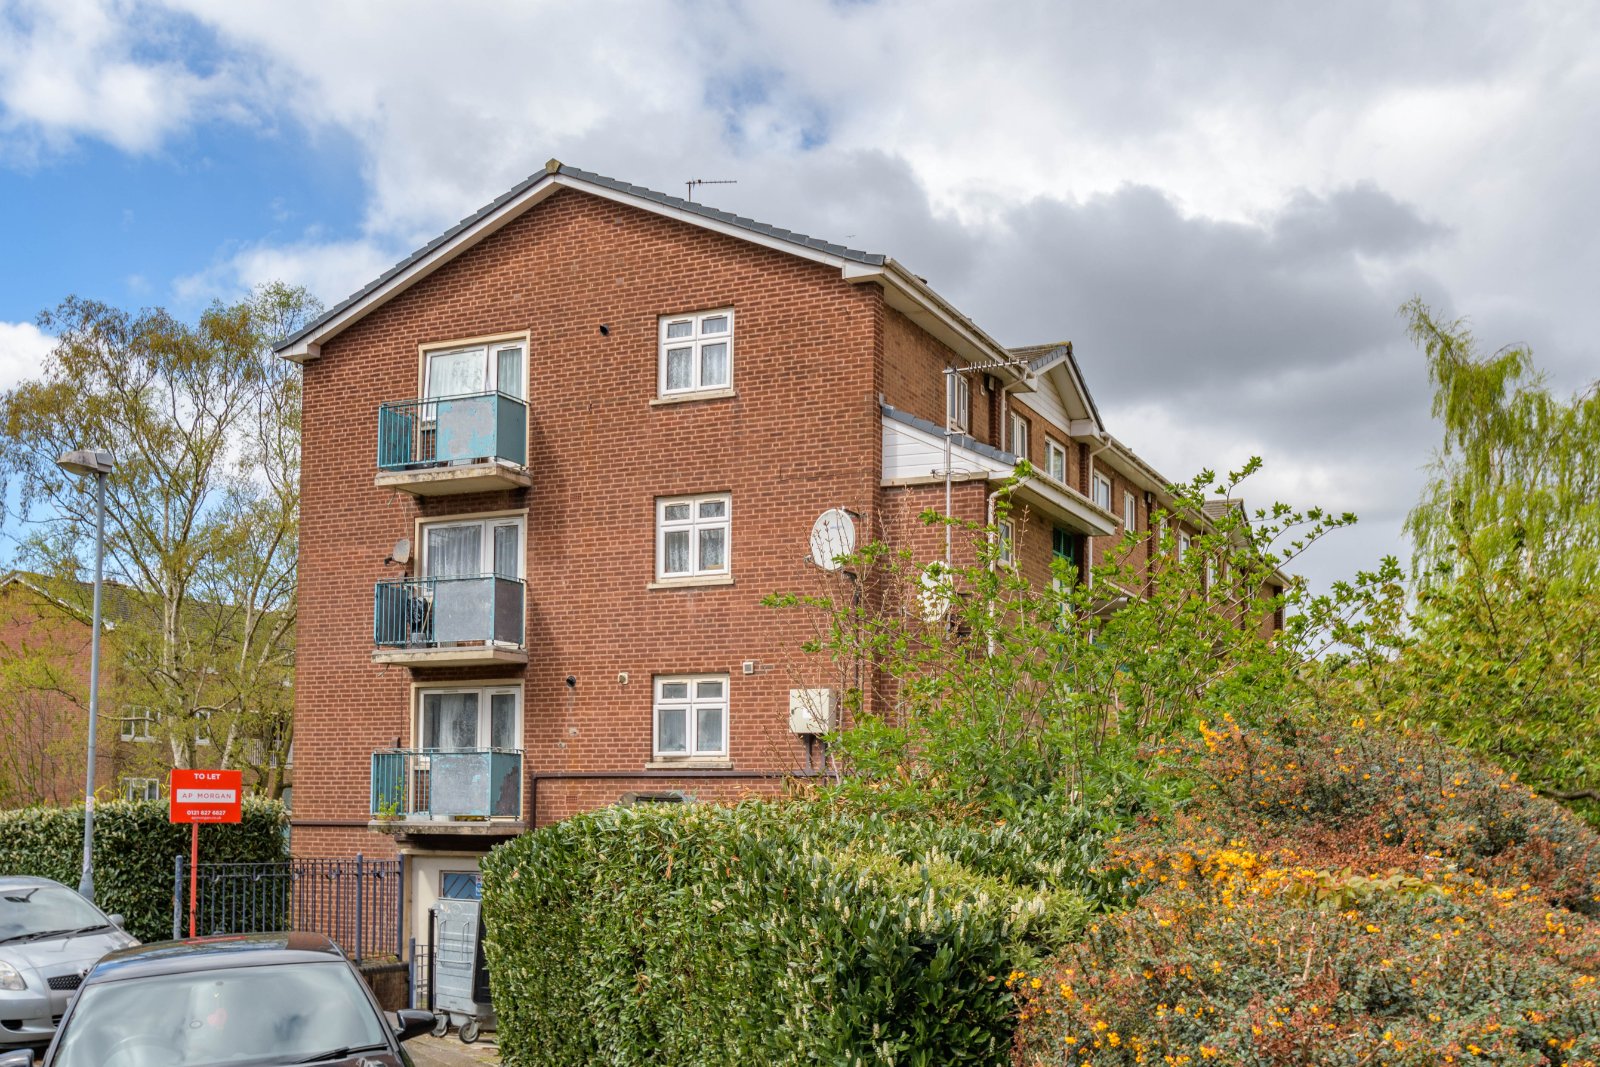 3 bed maisonette to rent in Westhorpe Grove, Birmingham  - Property Image 1